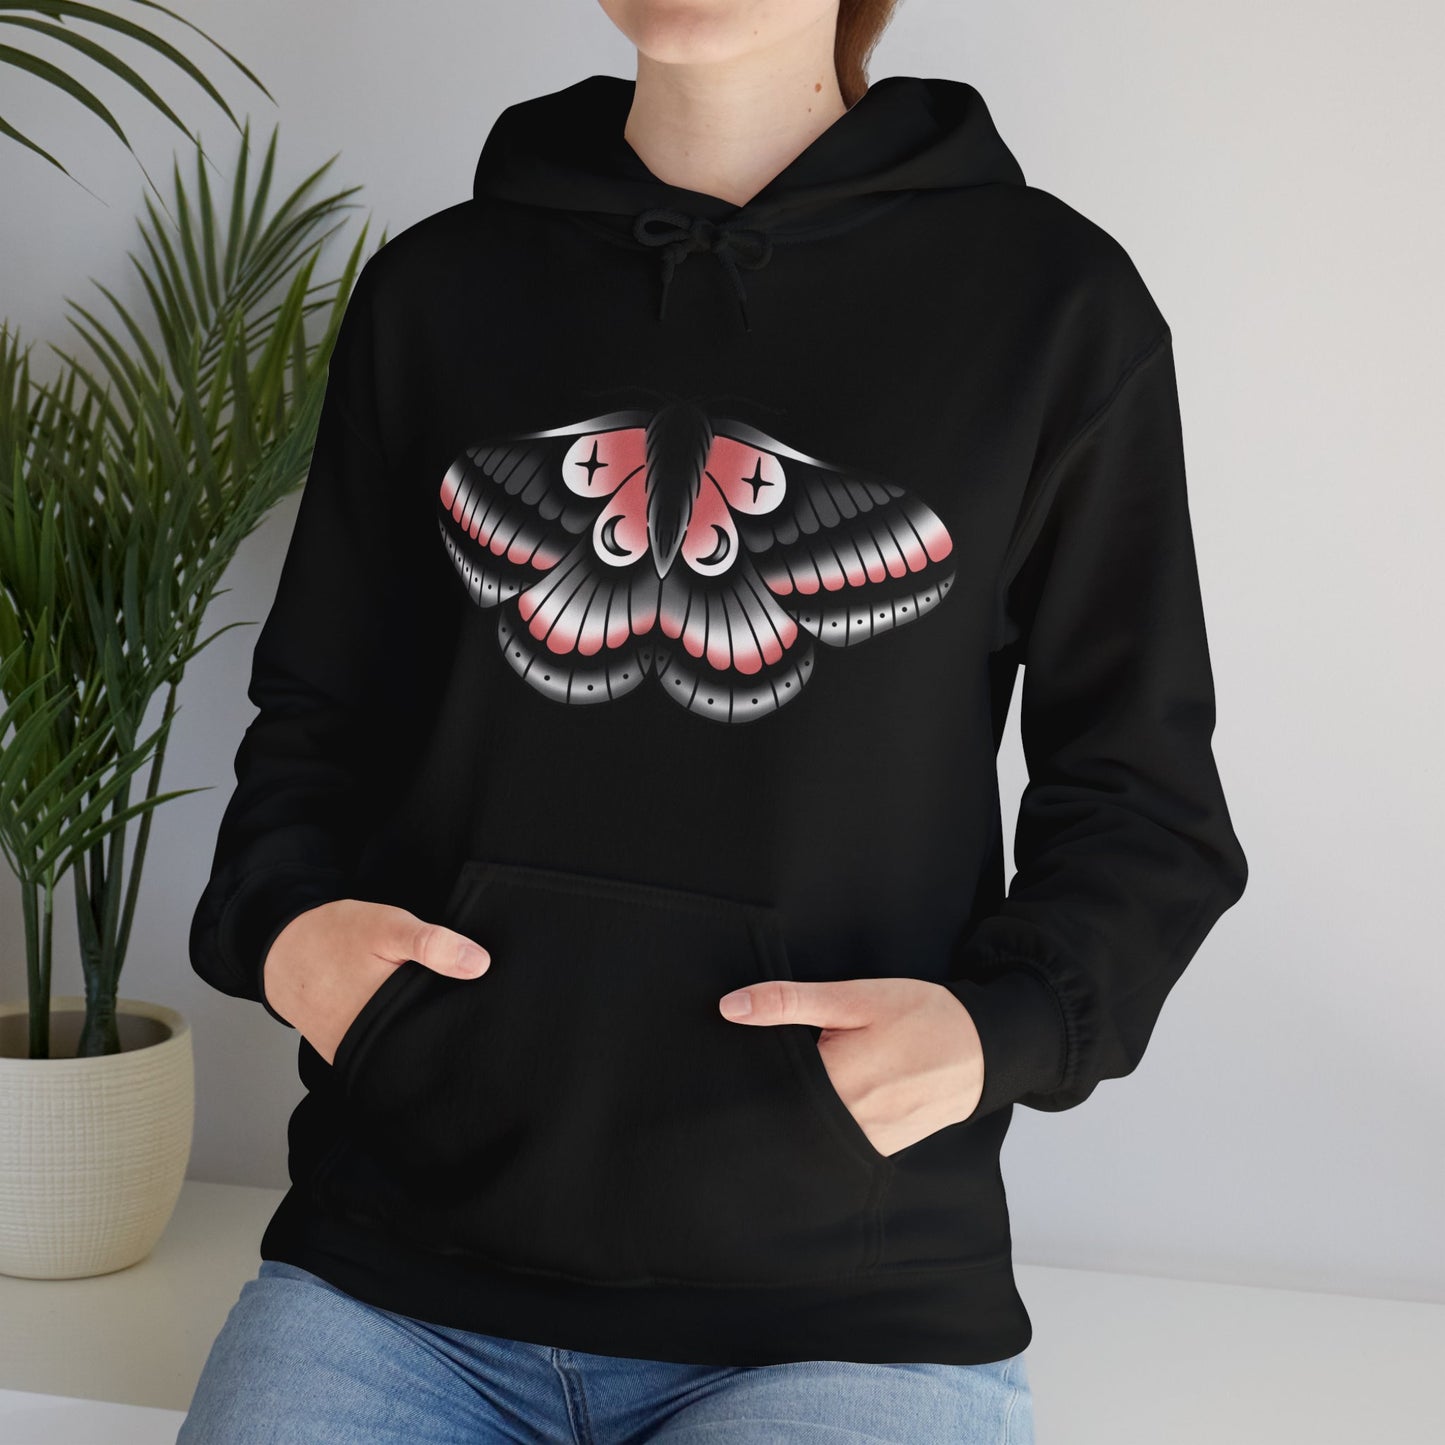 Drawn to the flame Hooded Sweatshirt